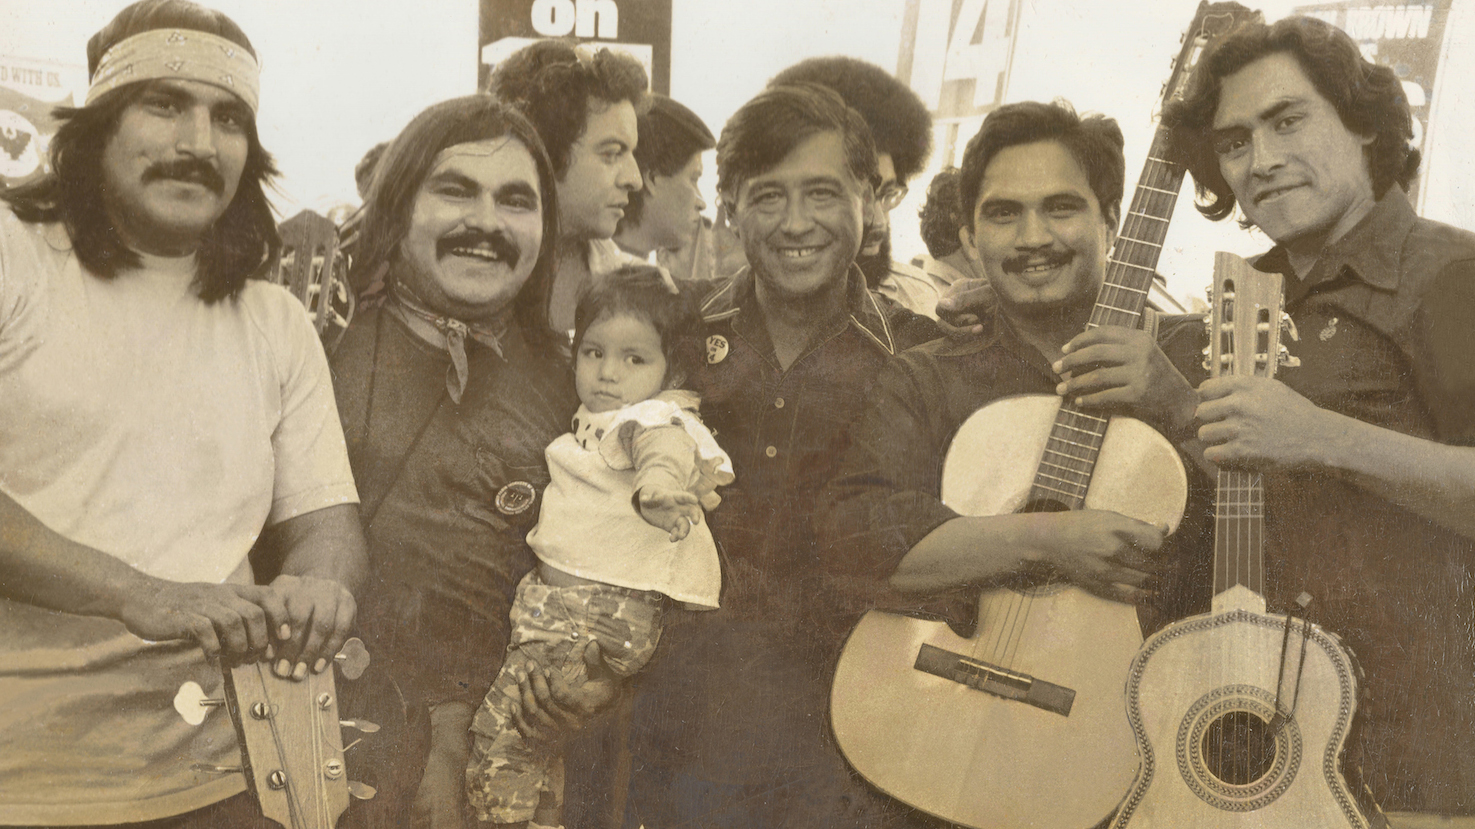 Ramon “Chunky” Sanchez (second from left, holding his daughter) with Cesar Chavez (center), Ricardo Sanchez (at left), Enrique Ramirez (right of Chavez) and unknown musician at far right, ca 1972. Photo courtesy of Ramon “Chunky” Sanchez.